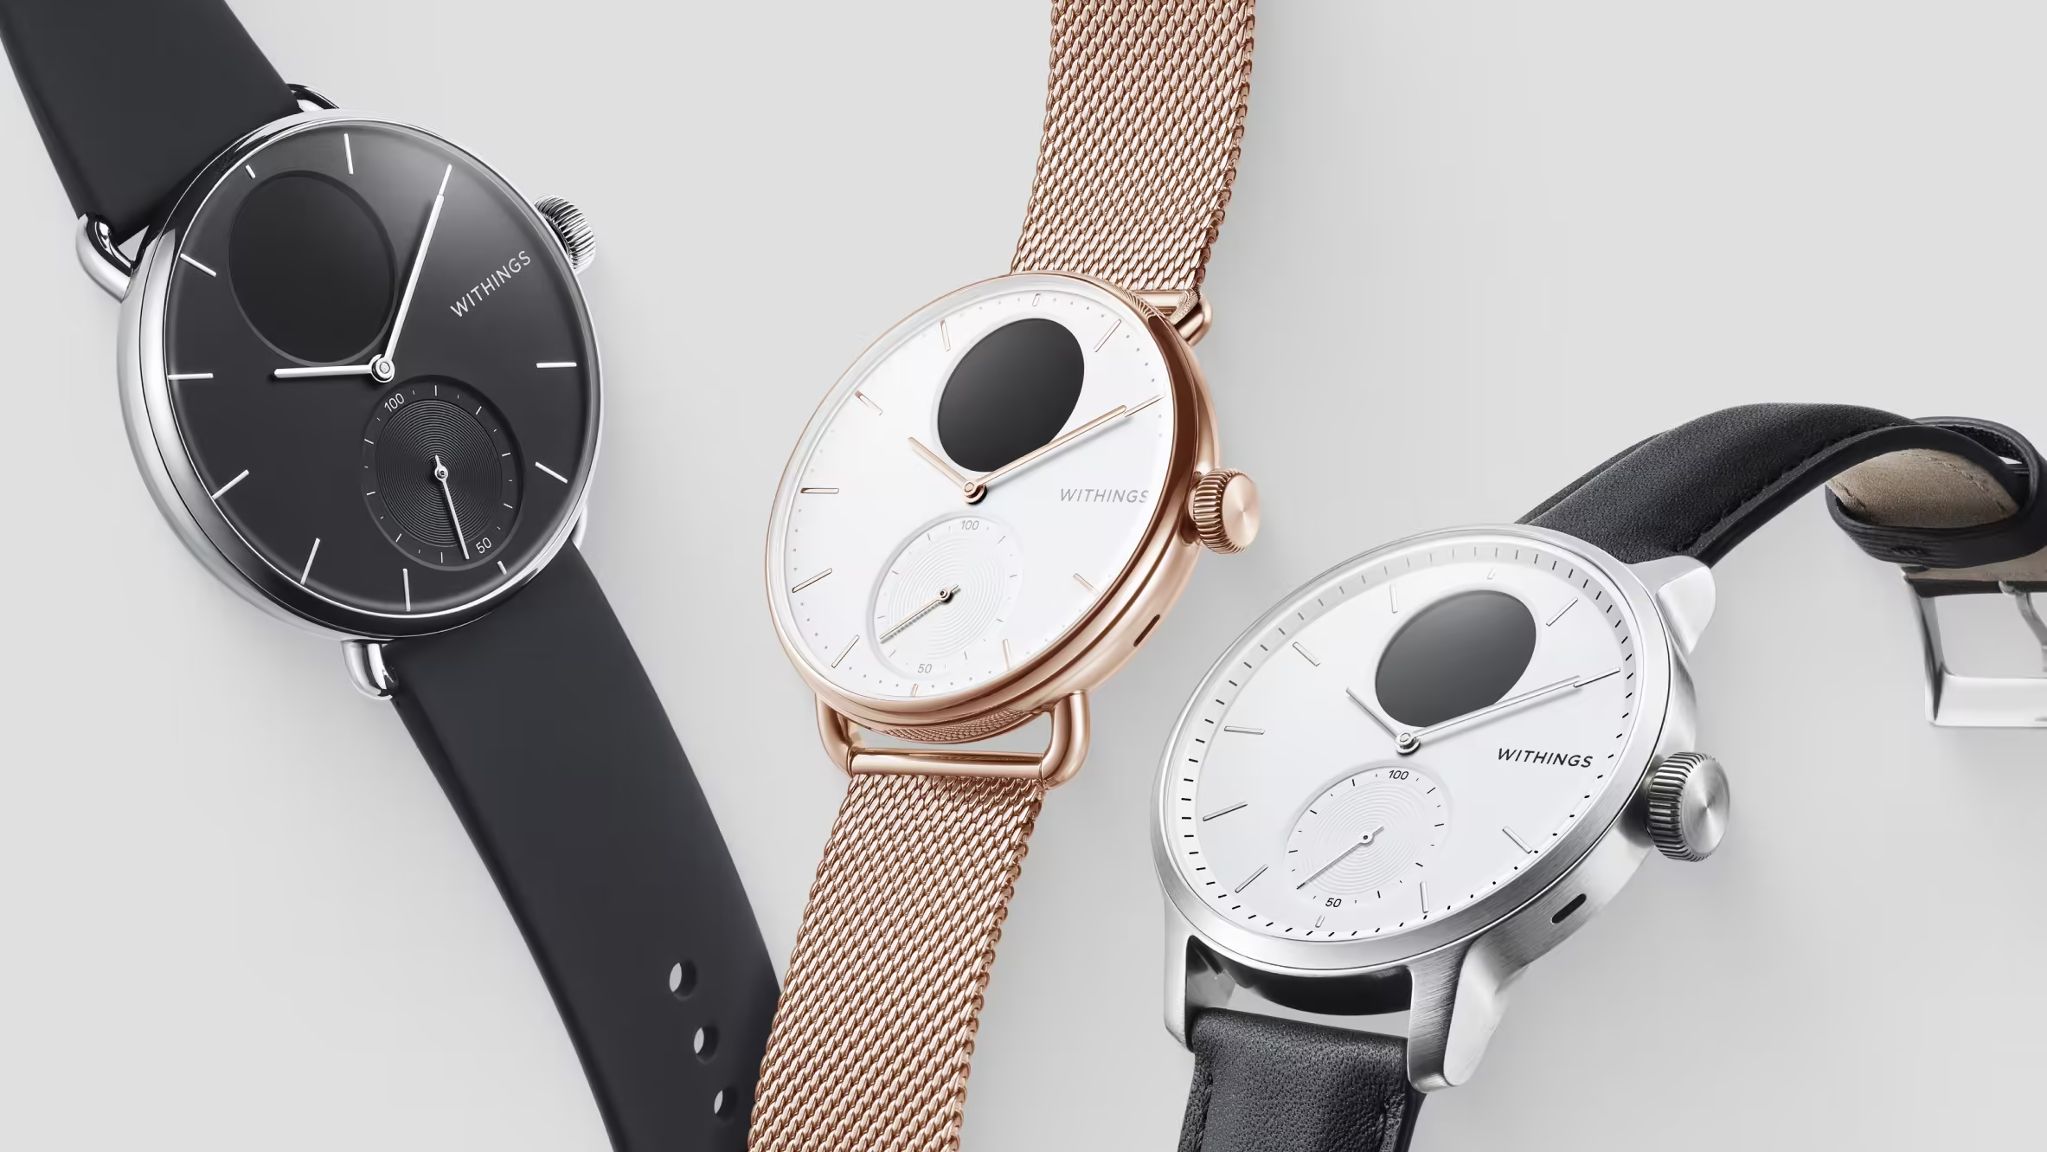 Withings-Scanwatch-Render-1